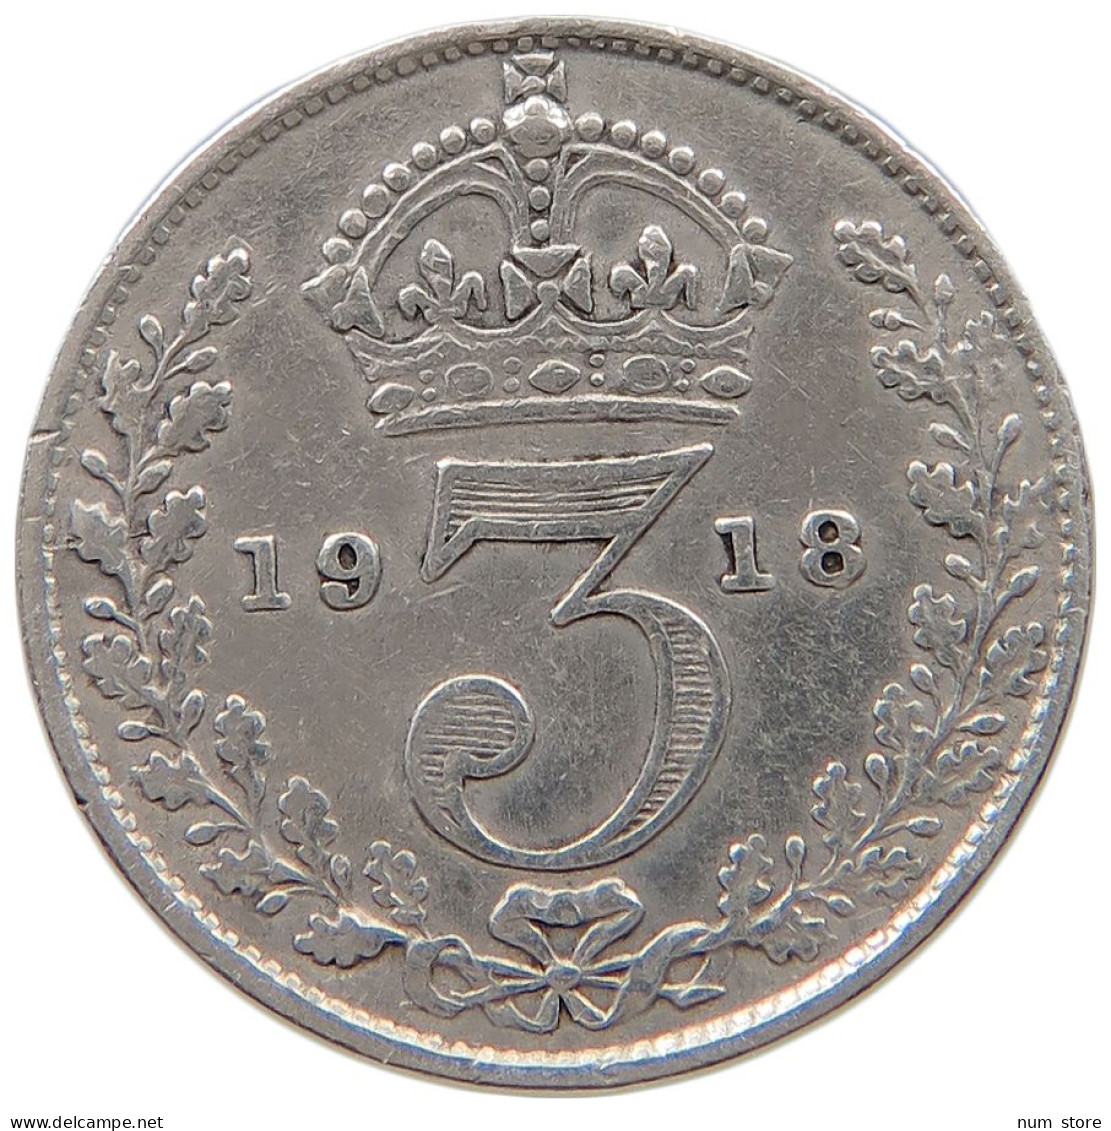 GREAT BRITAIN THREEPENCE 1918 #a052 0469 - F. 3 Pence